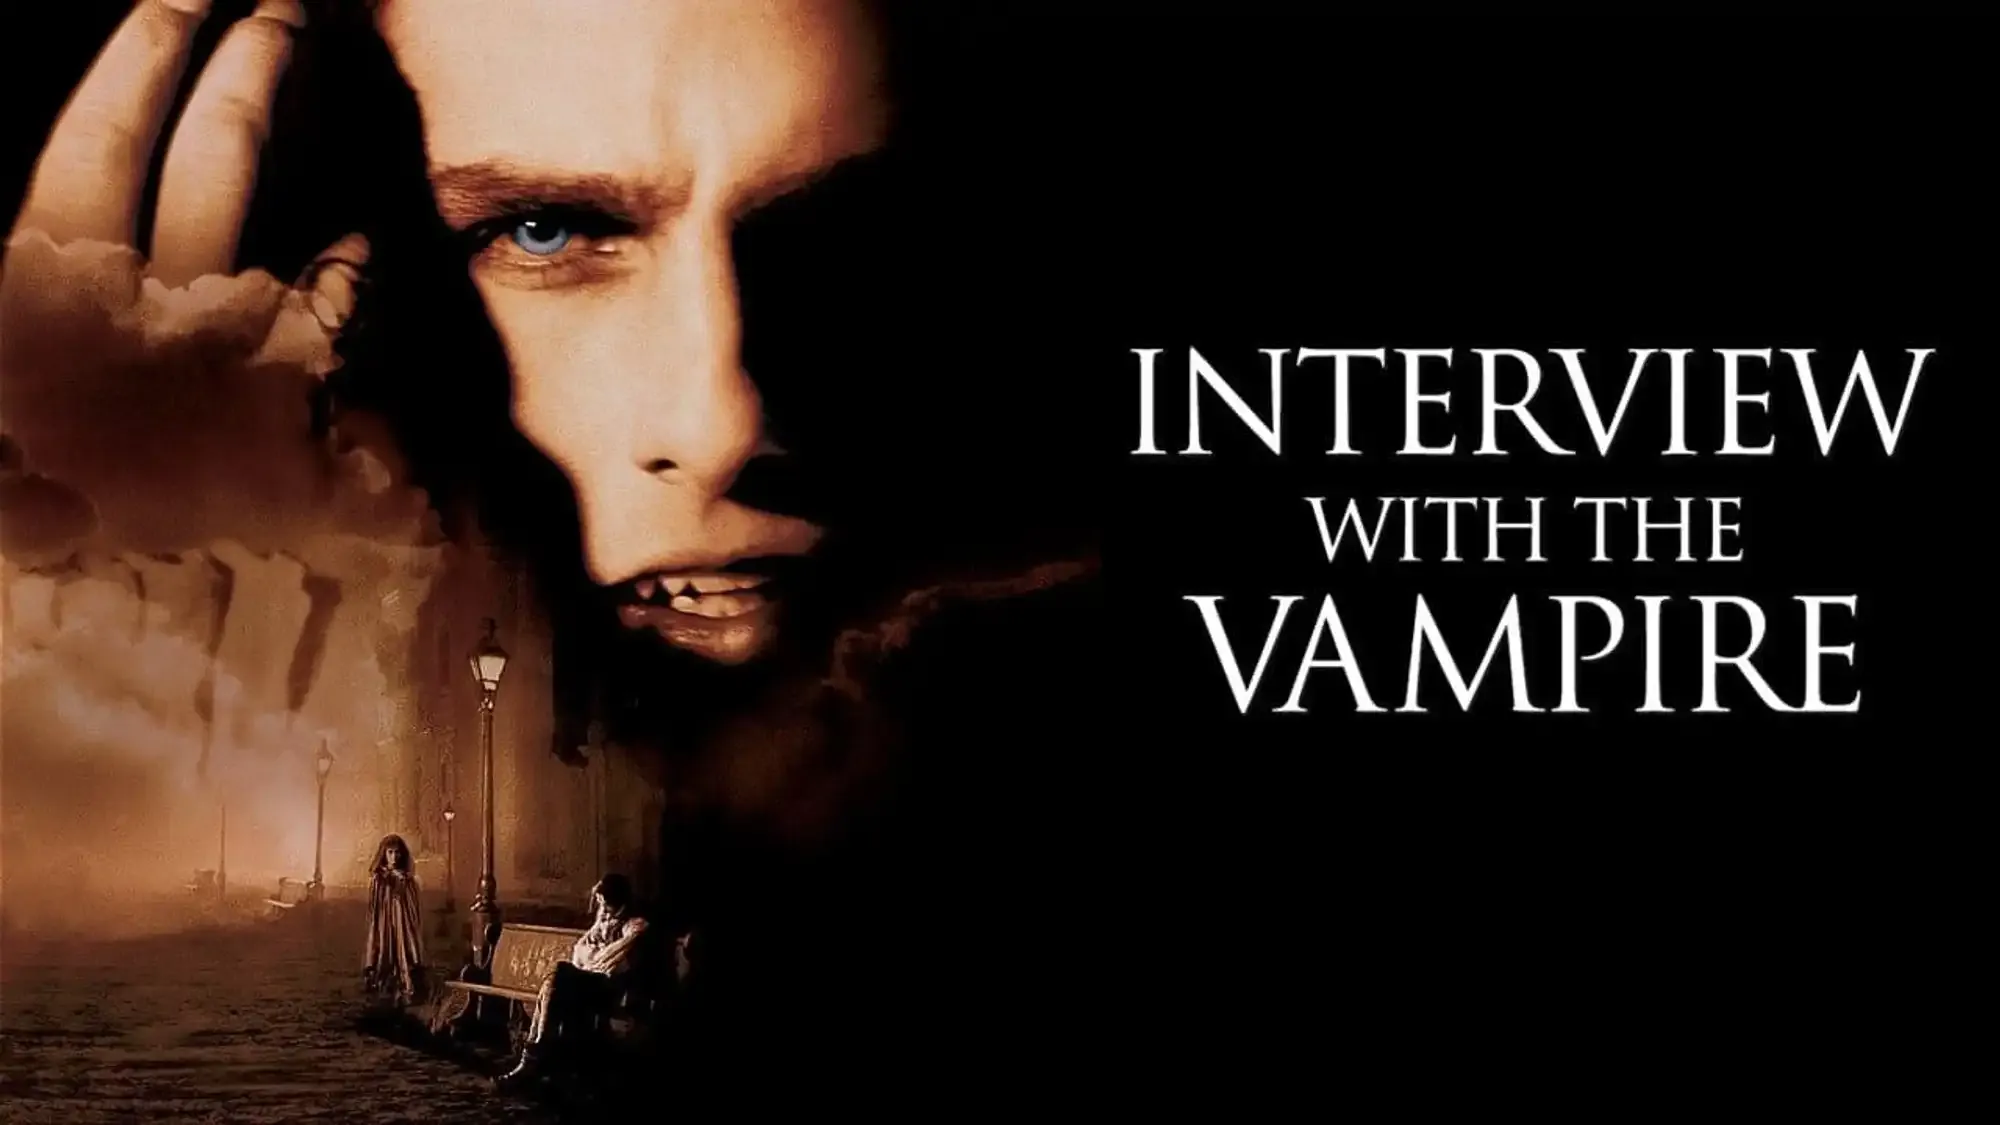 Interview with the Vampire movie review